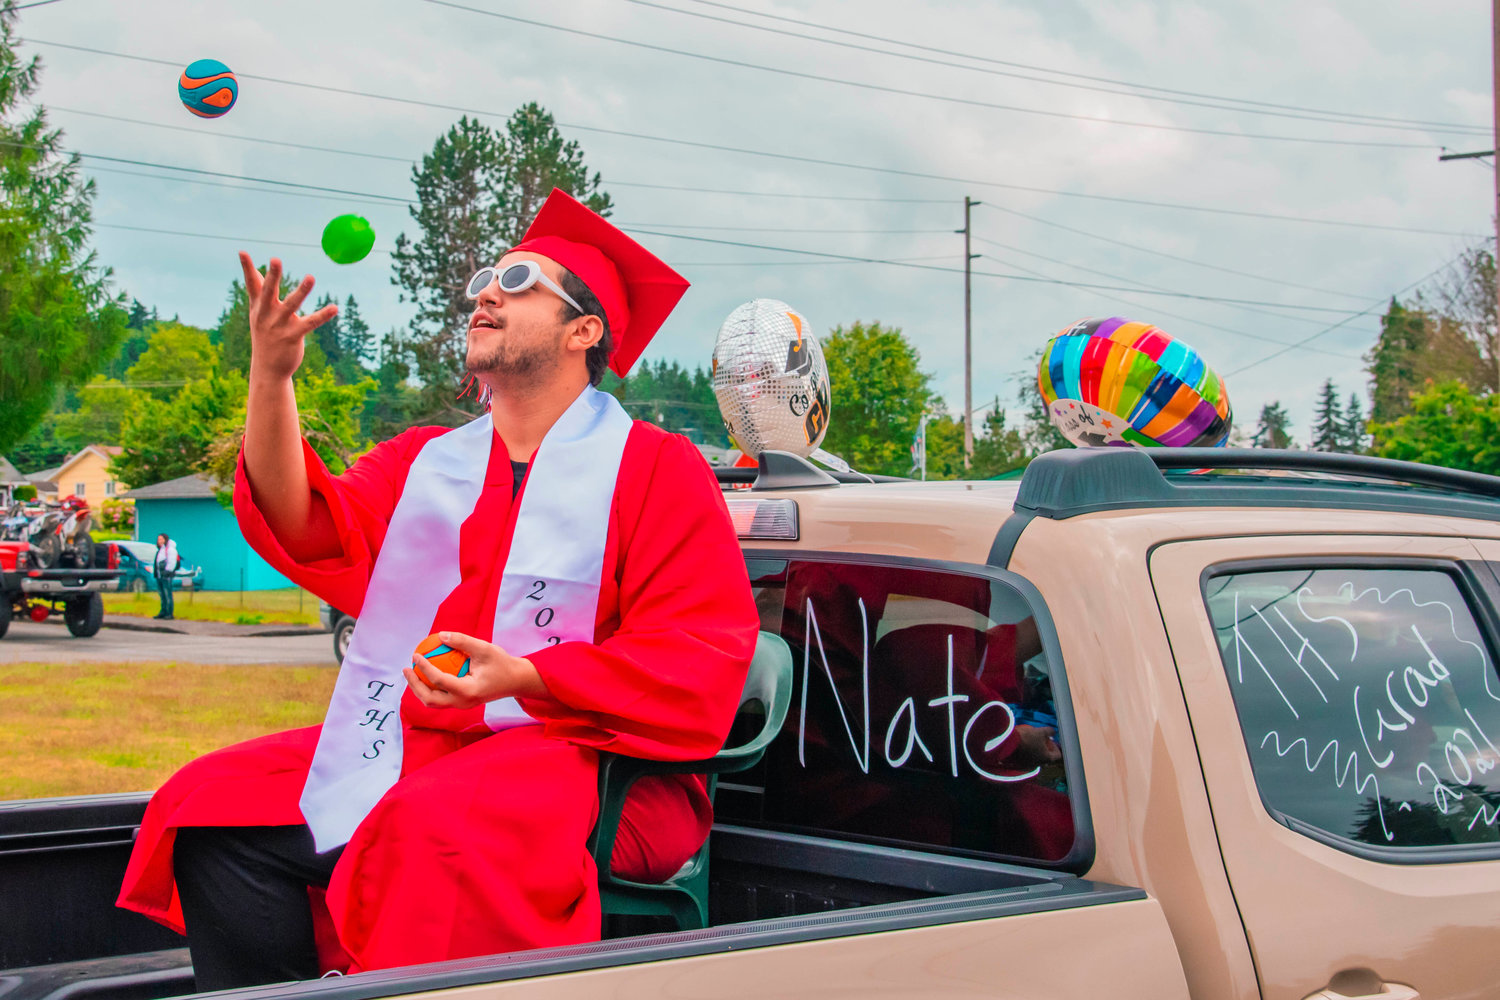 Nate, a Tenino graduate, sports sunglasses and juggles during a parade ceremony for the Class of 2021.